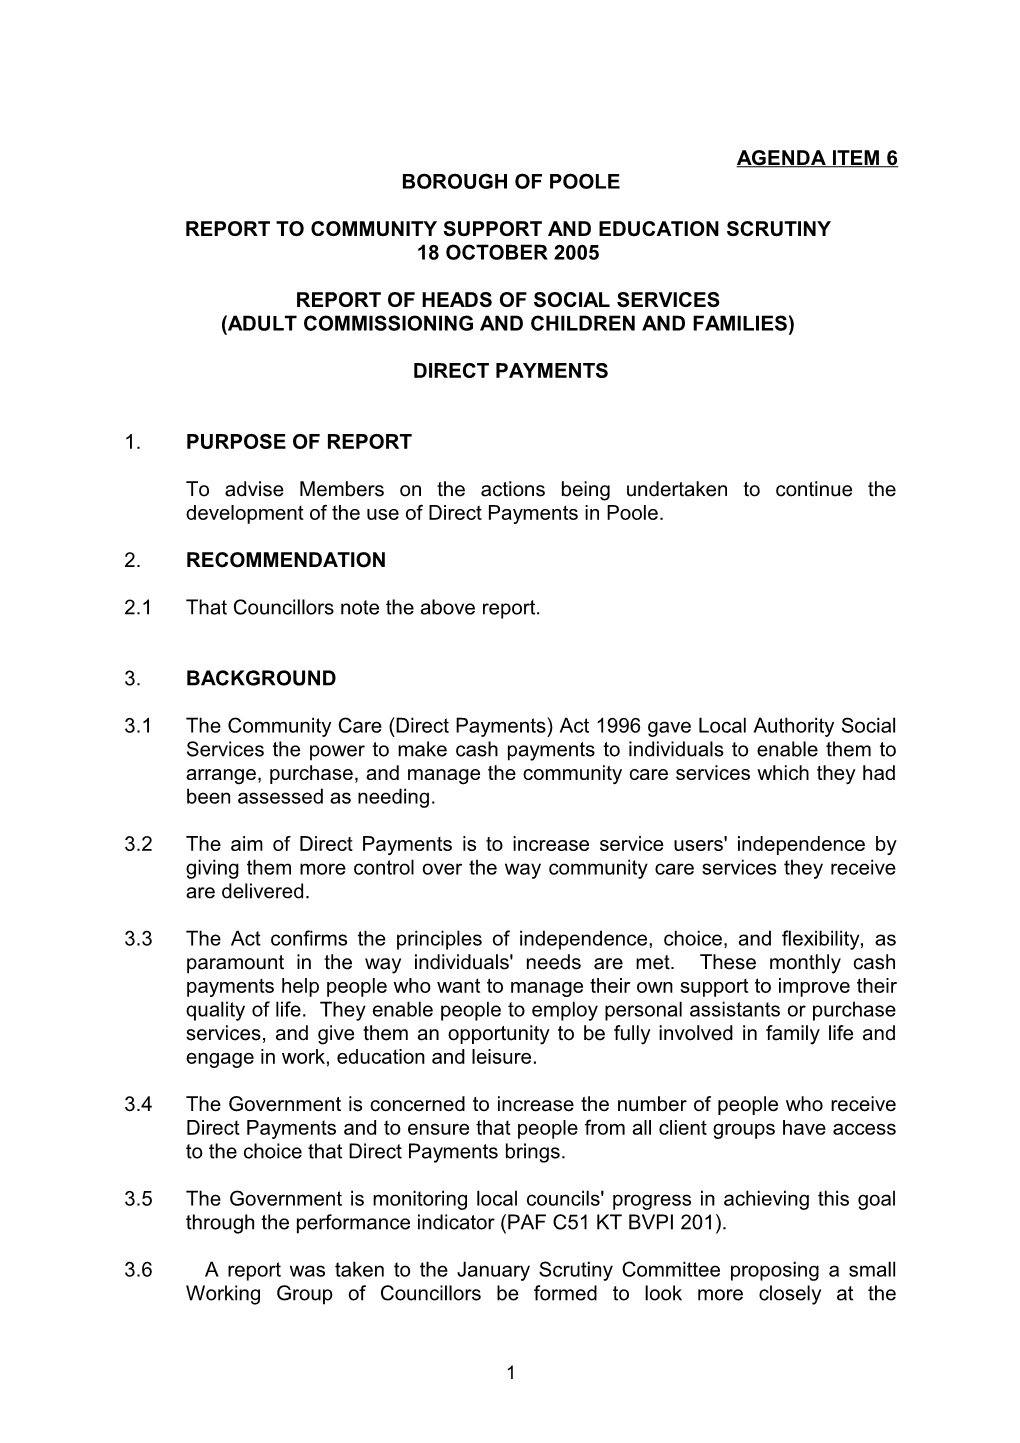 Report to Community Support and Education Scrutiny